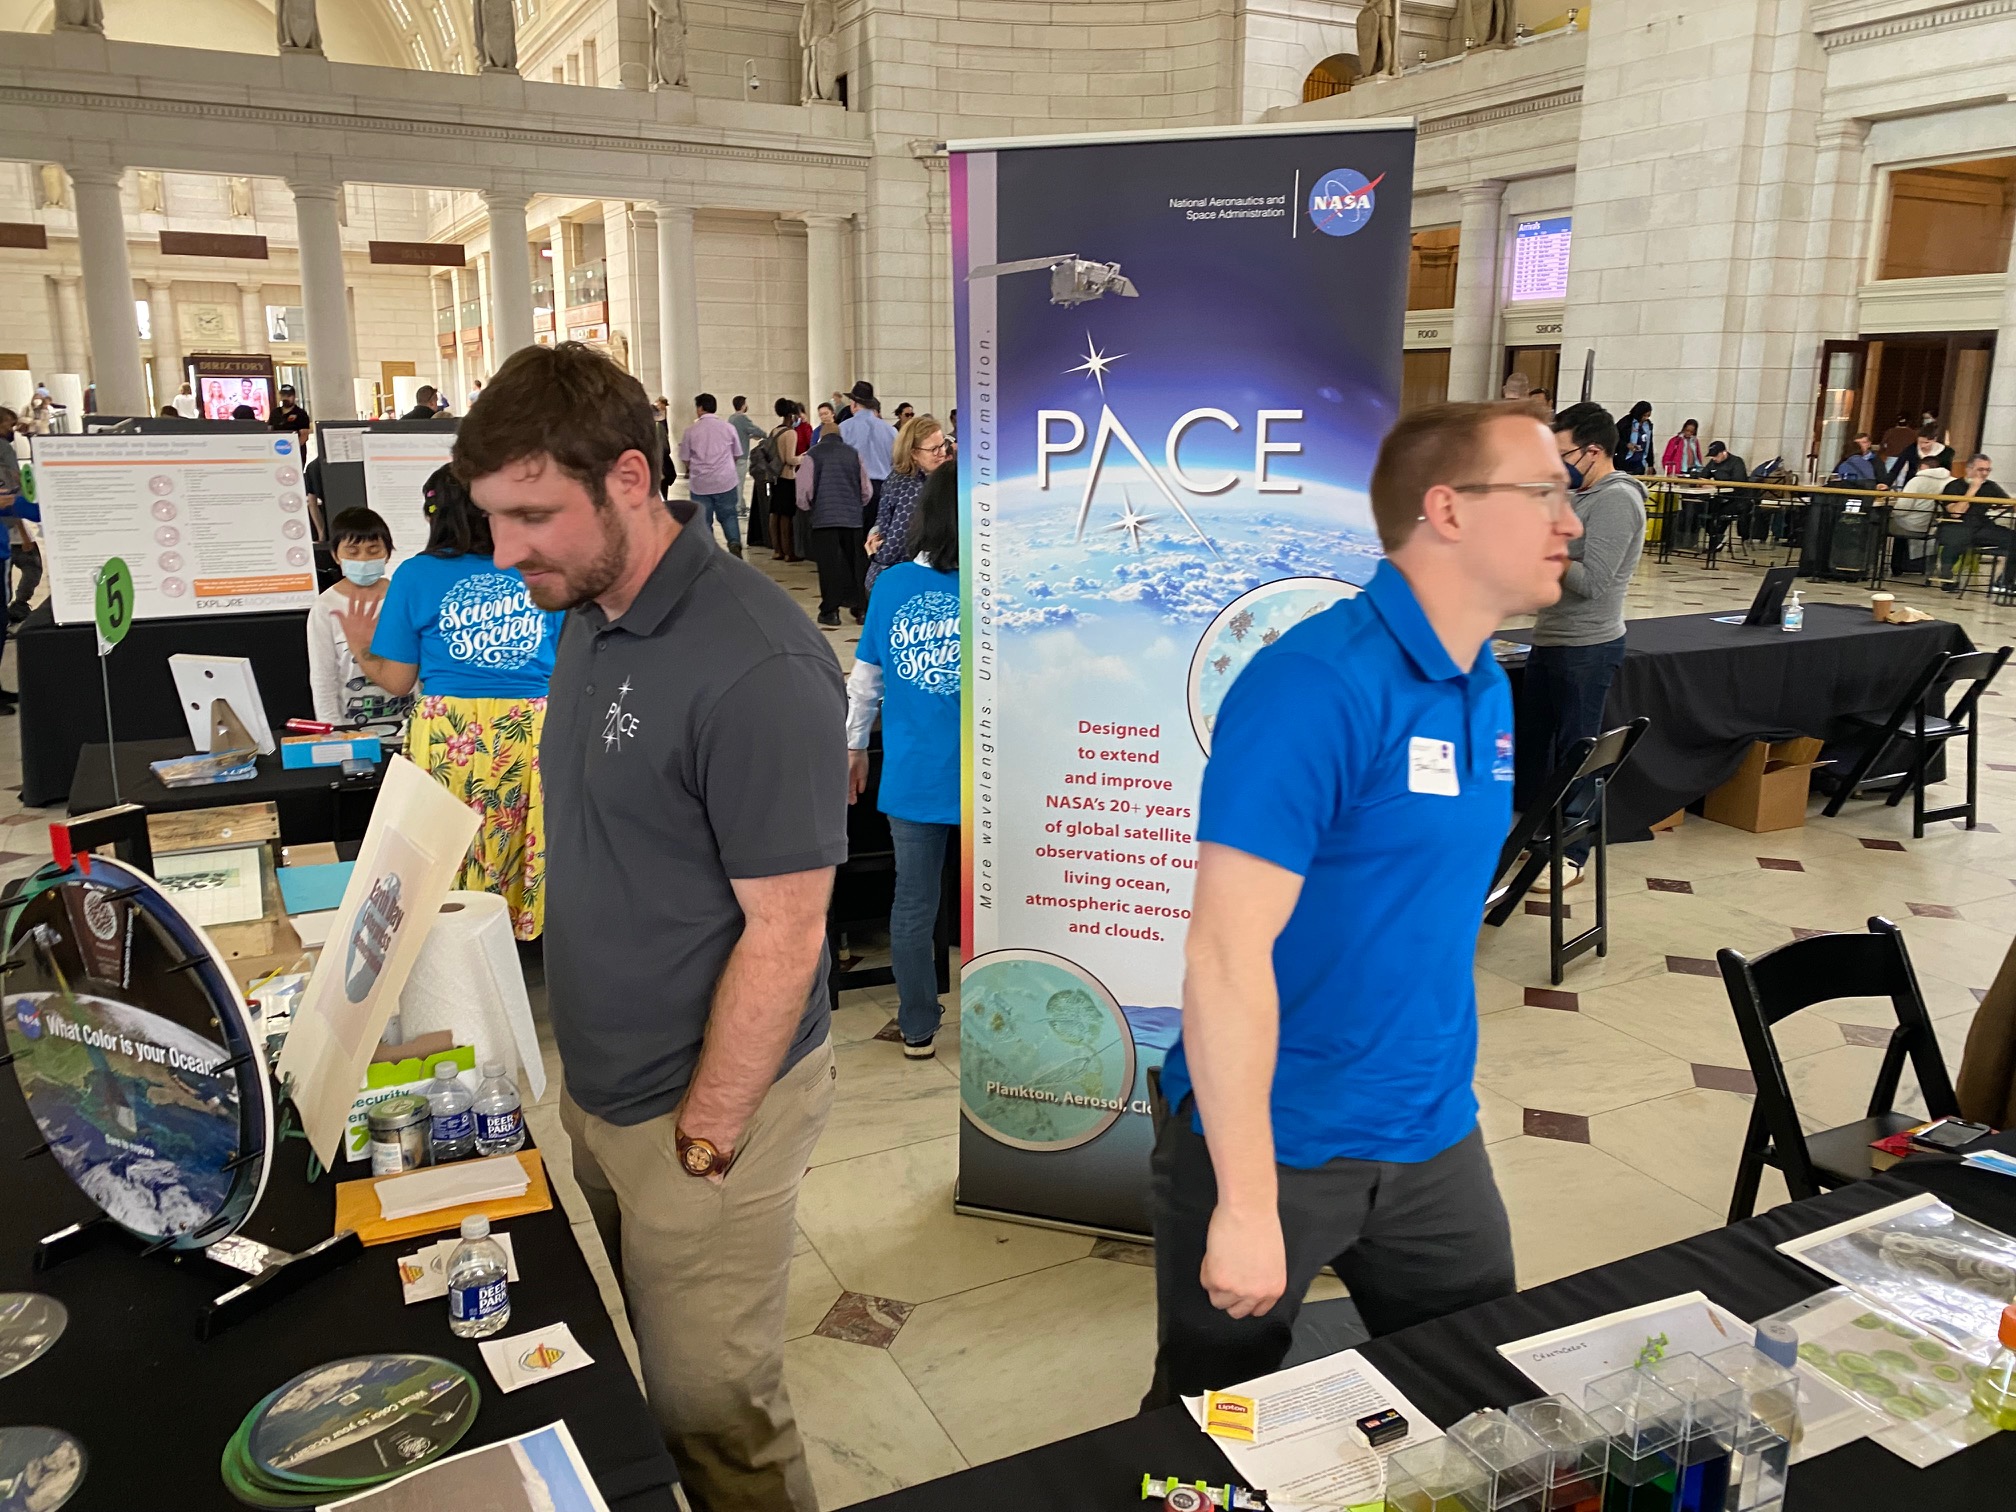 PACE members Emerson Sisk and Zakk Rhodes talk with attendees about PACE and the spacecraft build.